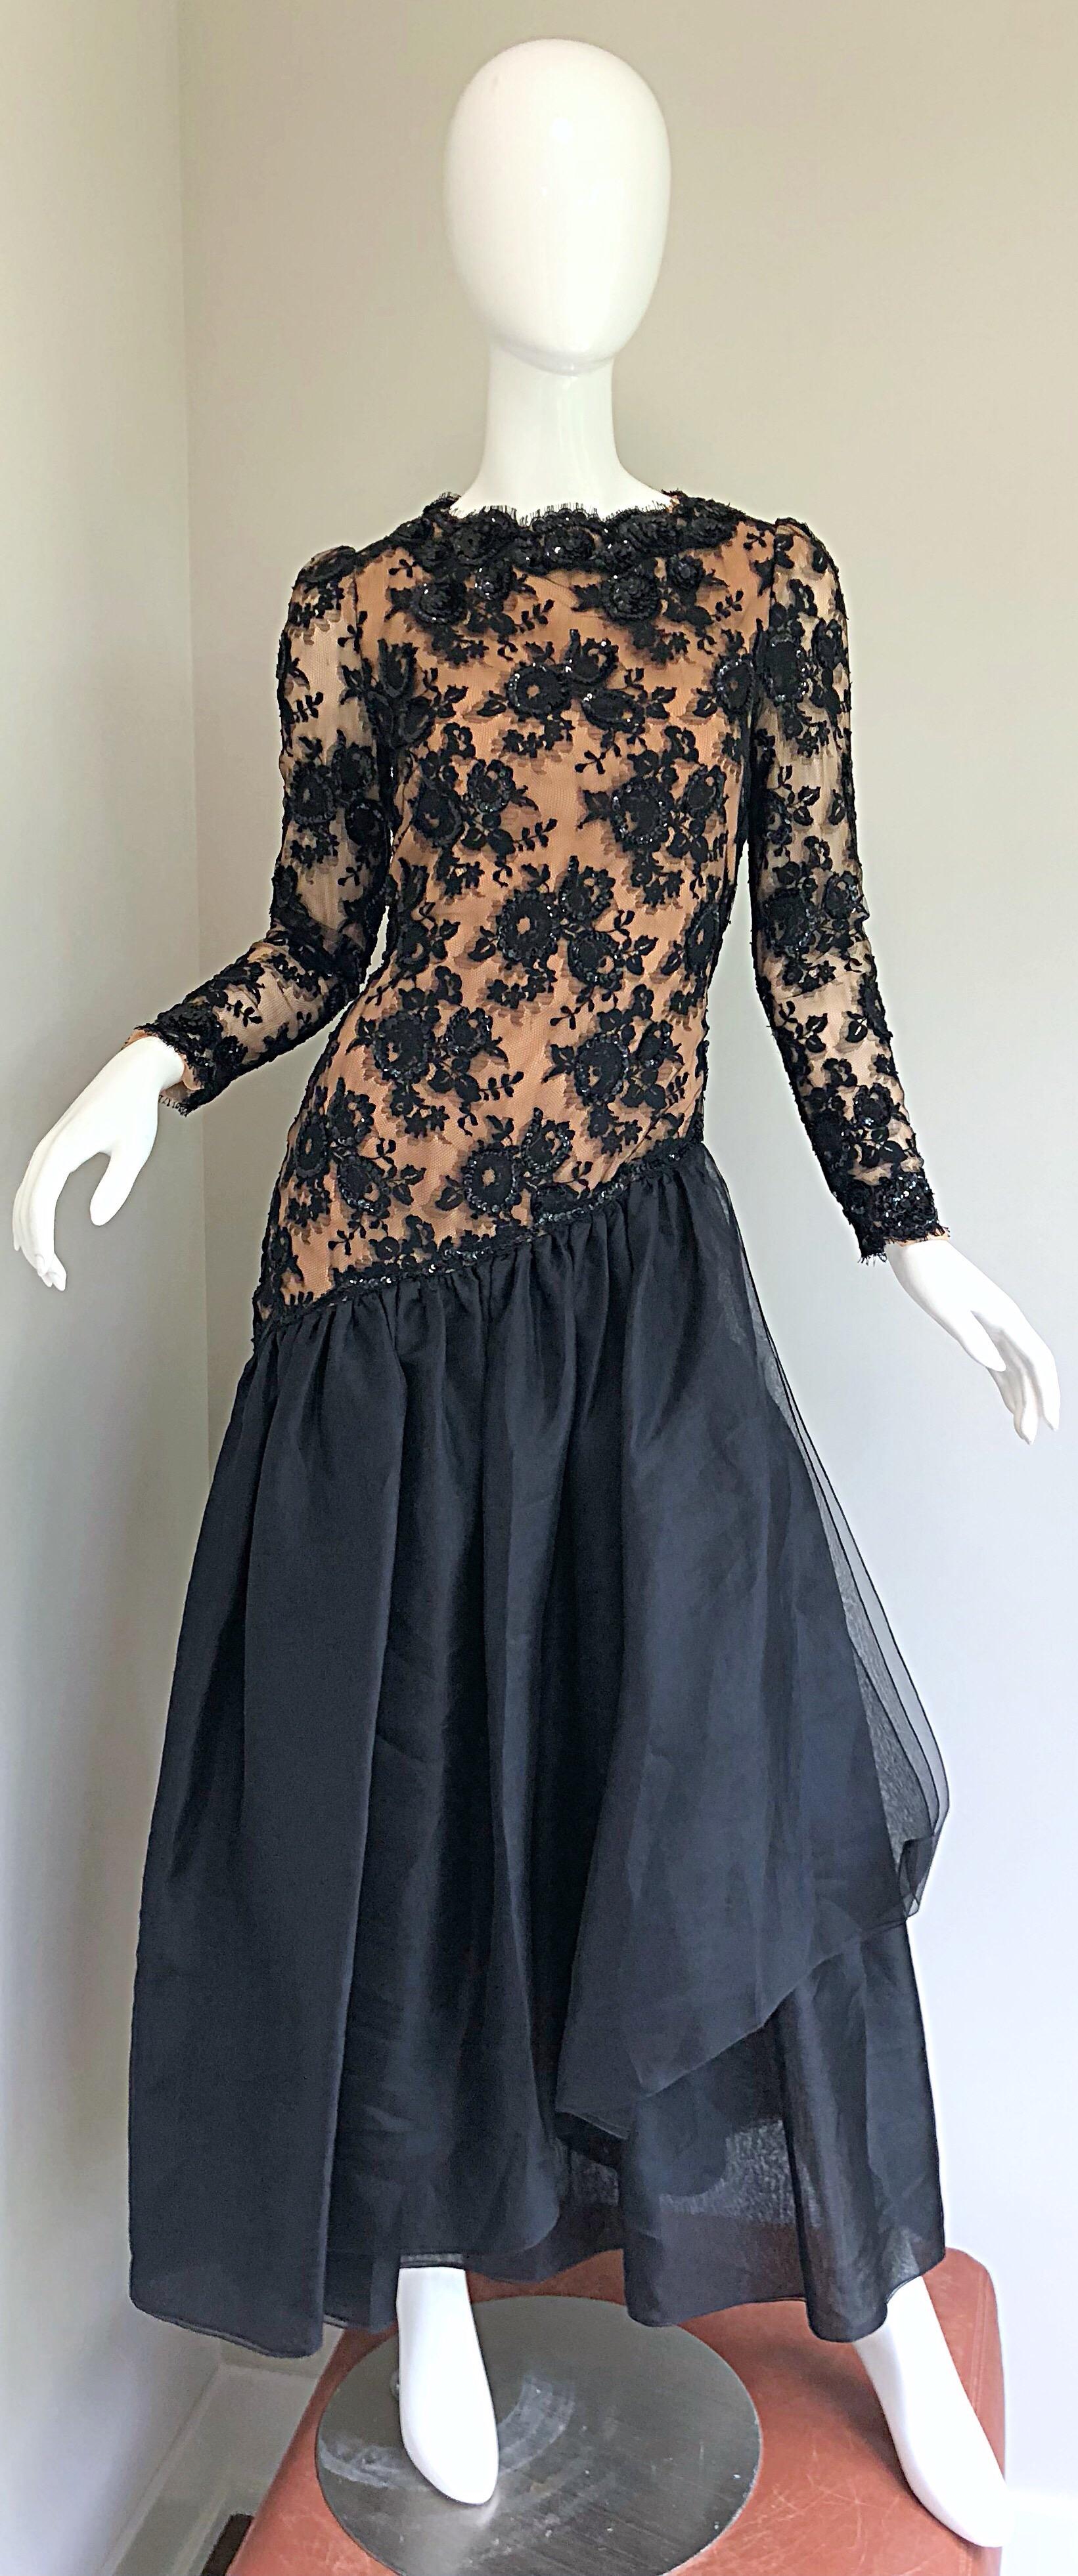 Vintage Bill Blass Black Nude 90s Size 6 / 8 Sequined Chiffon Evening Gown Dress For Sale 8